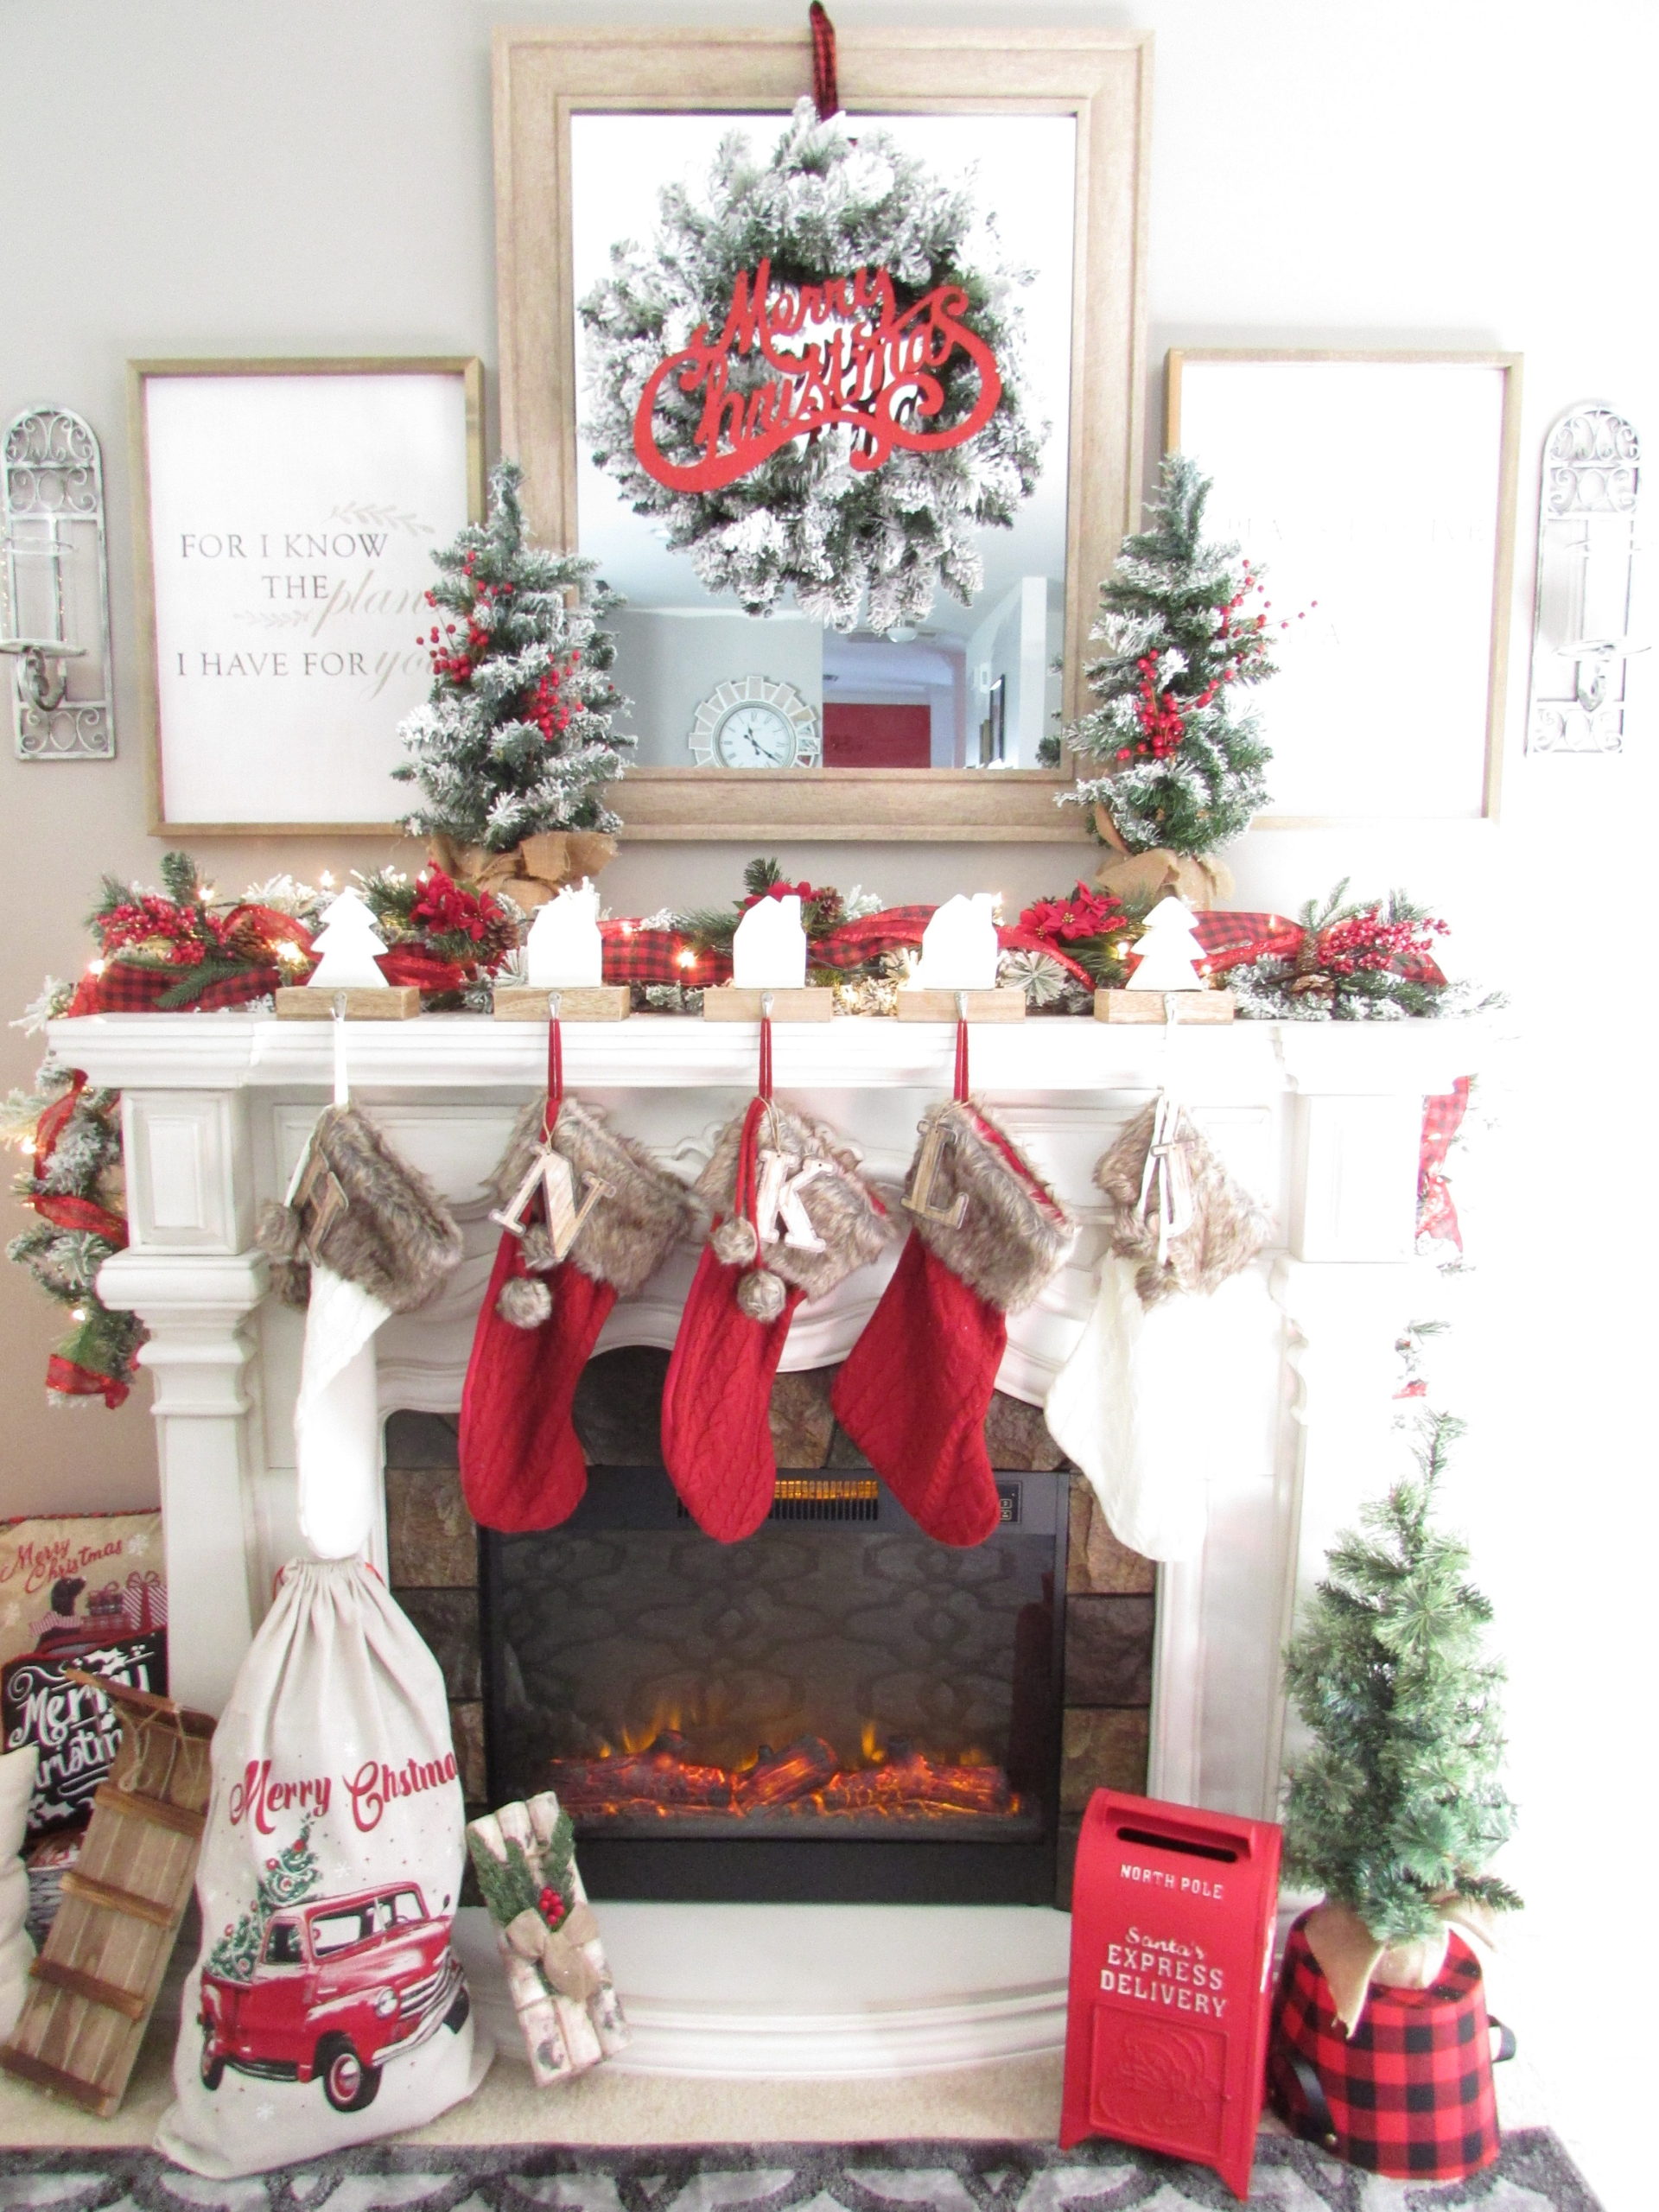 Tips For Creating A Simple Rustic Christmas Mantel
